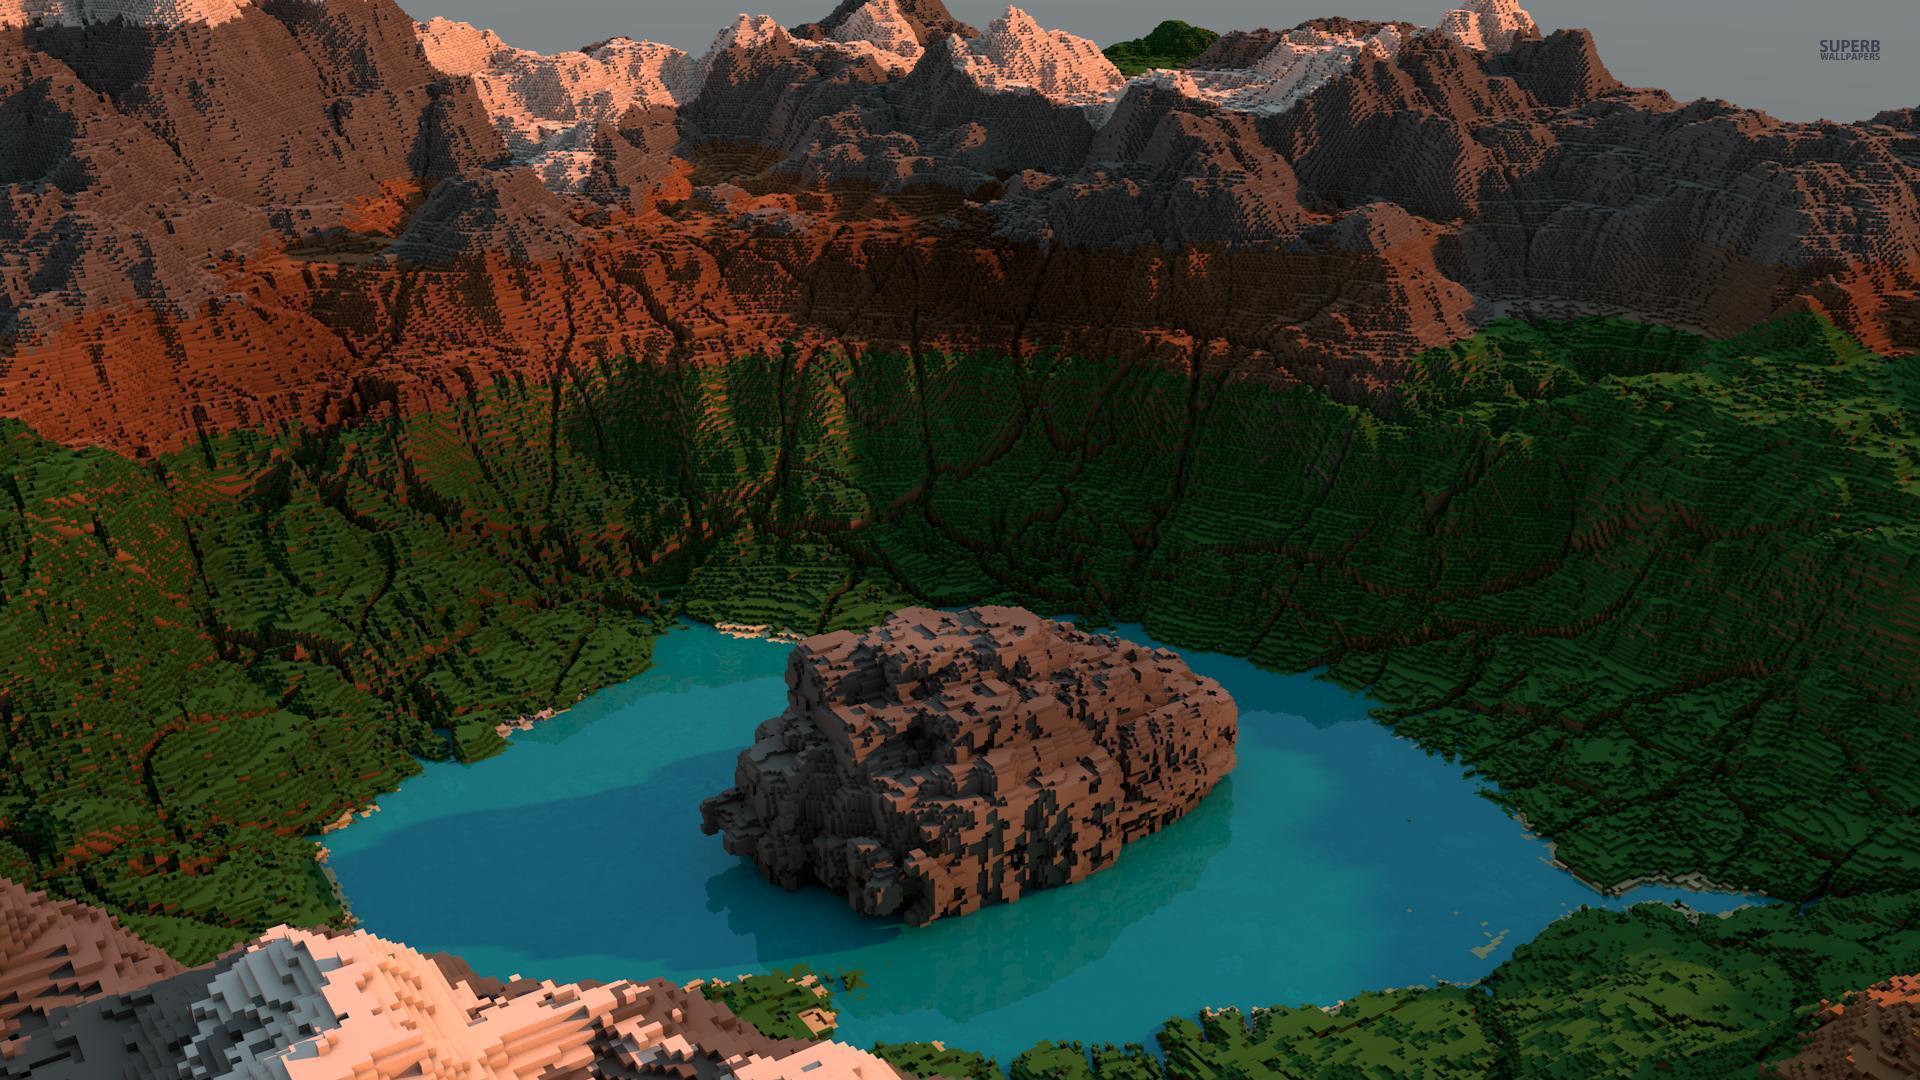 lake-surrounded-by-mountains-in-minecraft-51840-1920x1080.jpg